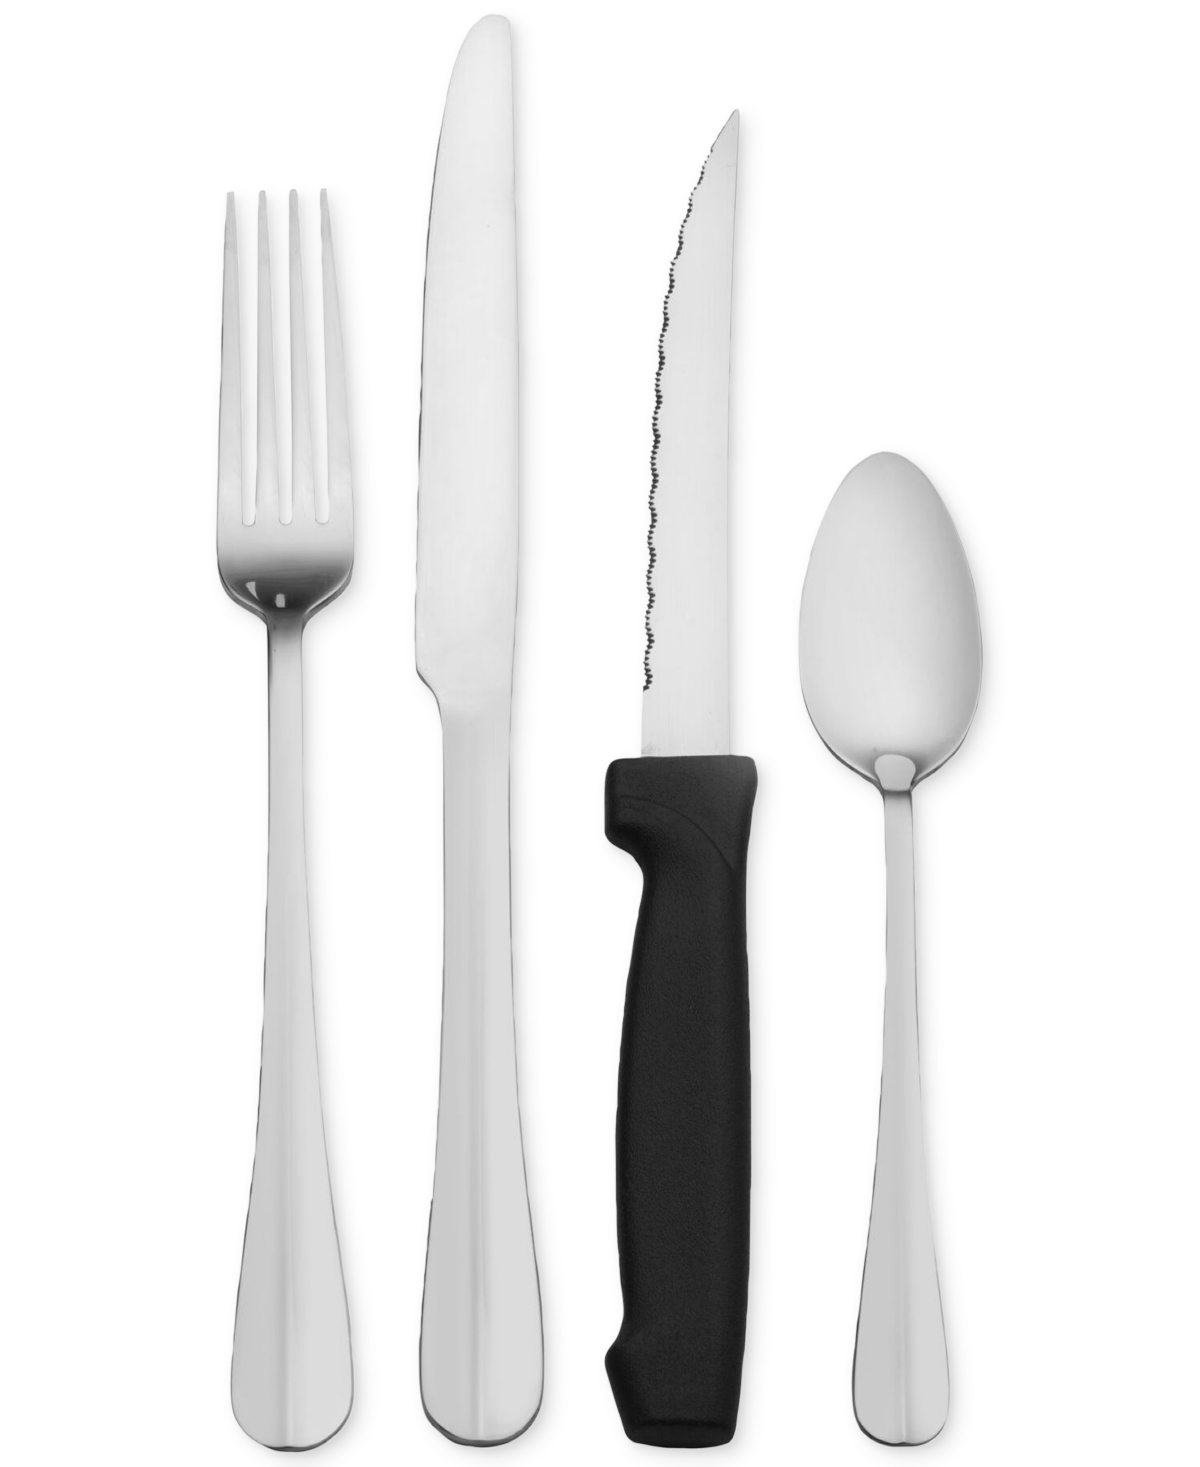 Pfaltzgraff Simplicity 16-pc. Flatware With Steak Knives Set, Service For 4 In Stainless Steel